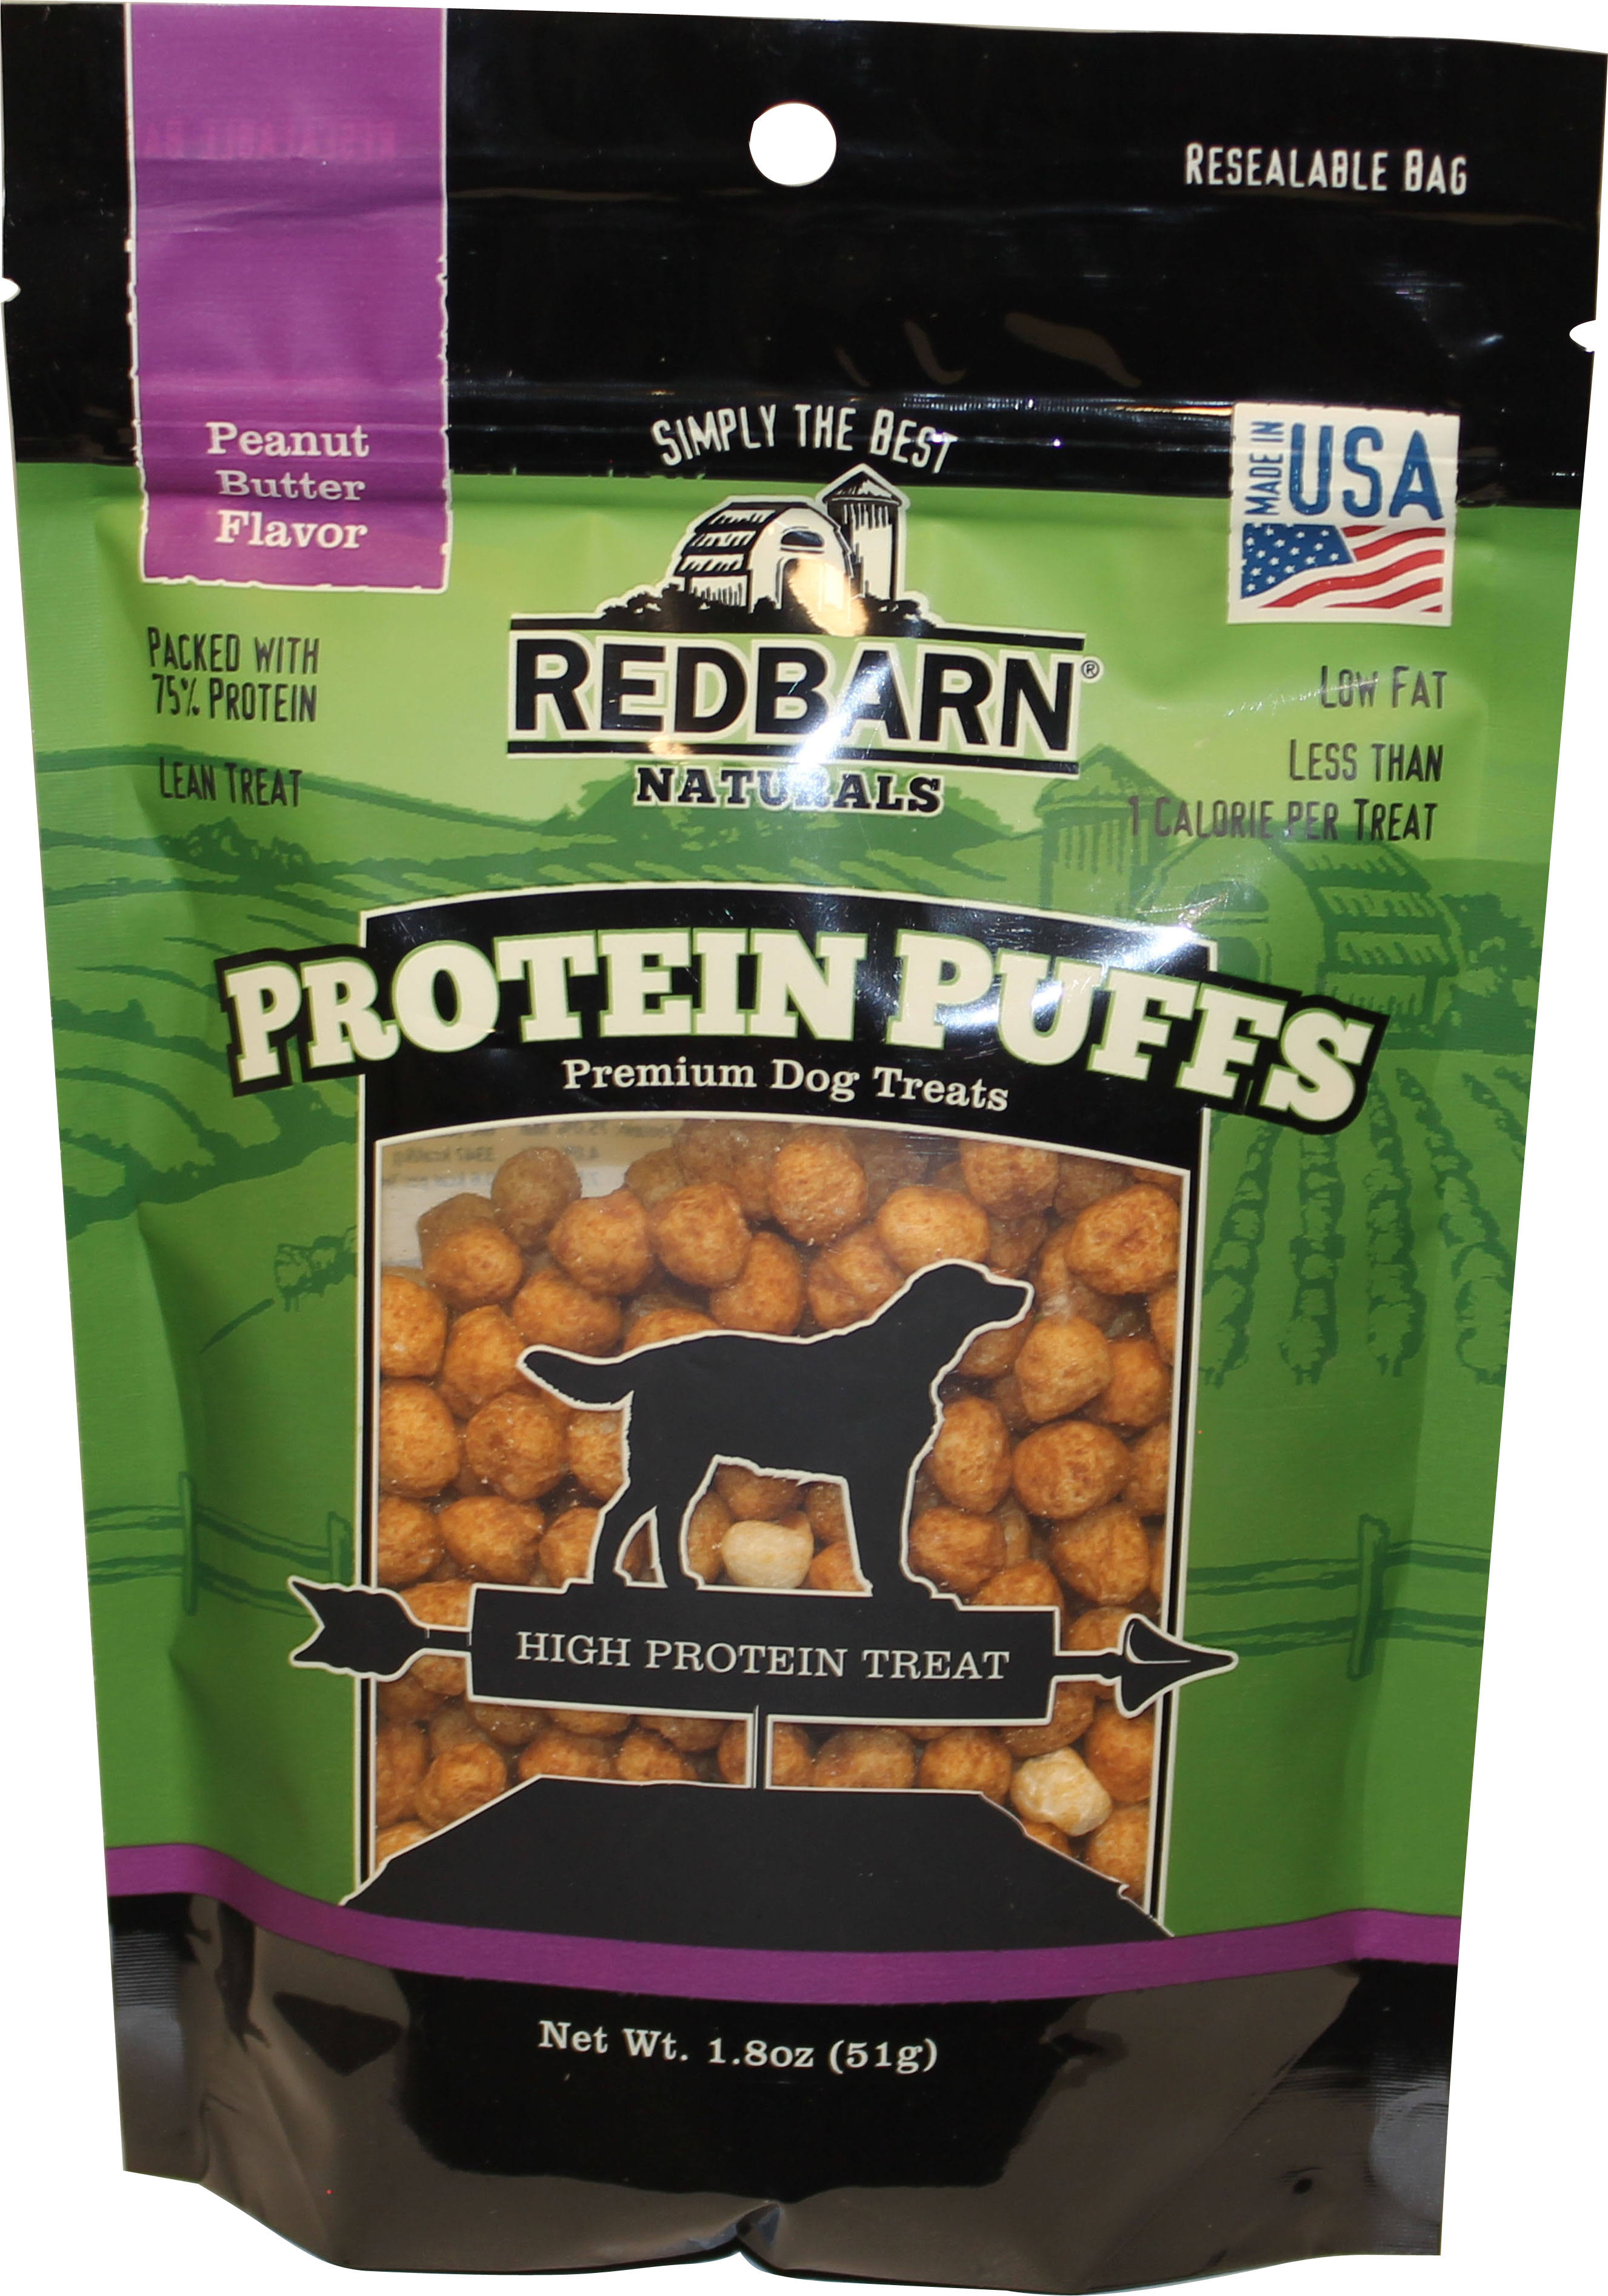 Redbarn Pet Products 255035 Protein Puffs Dog Treat